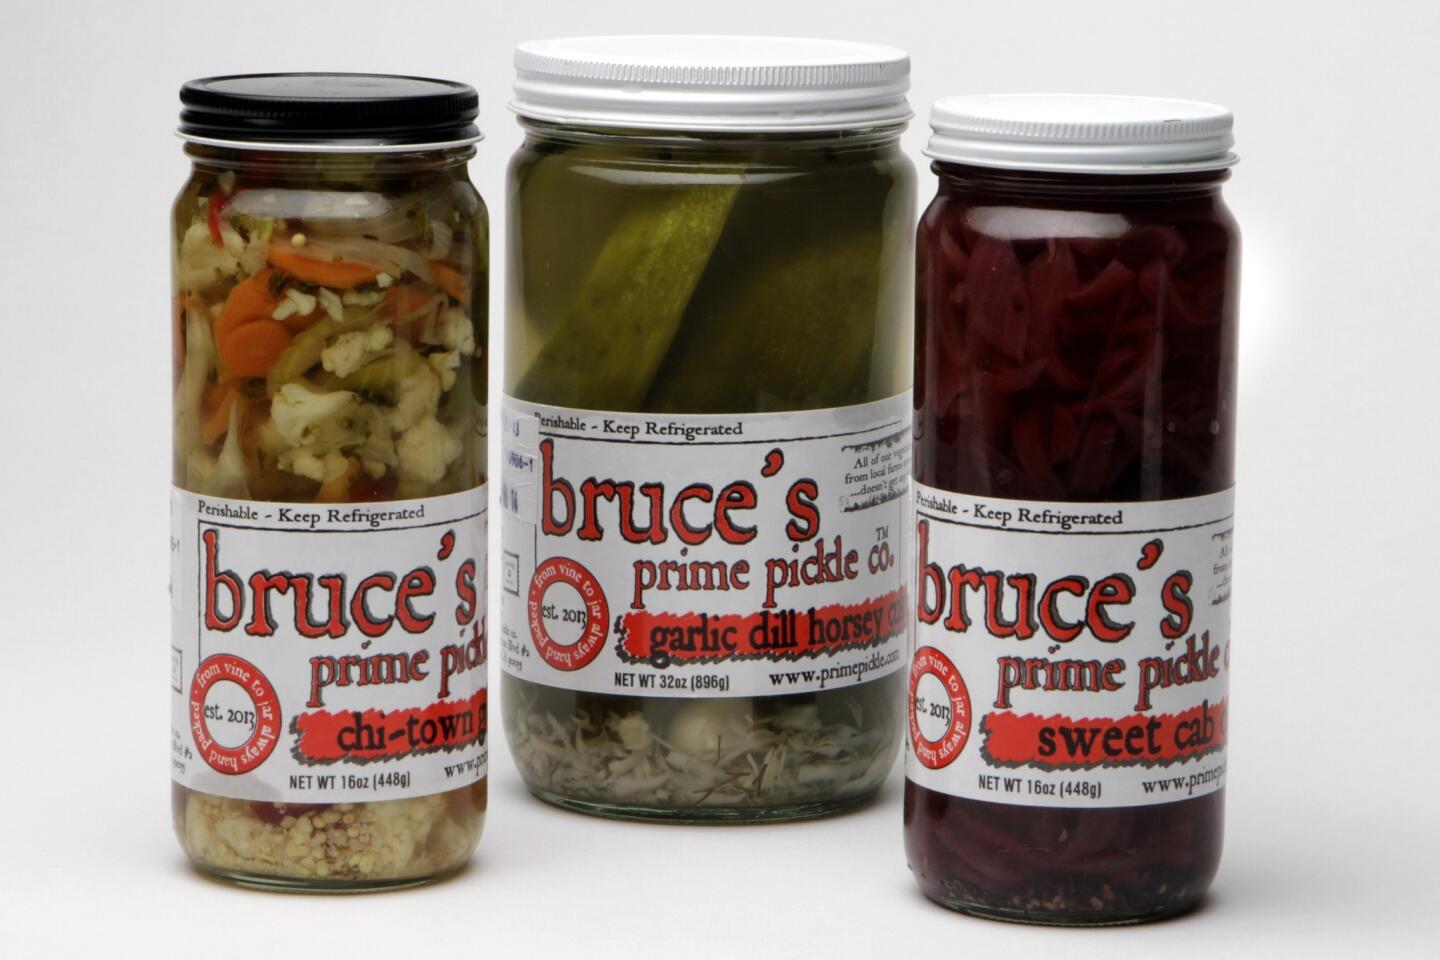 Assorted pickles from Bruce's Prime Pickle Co.